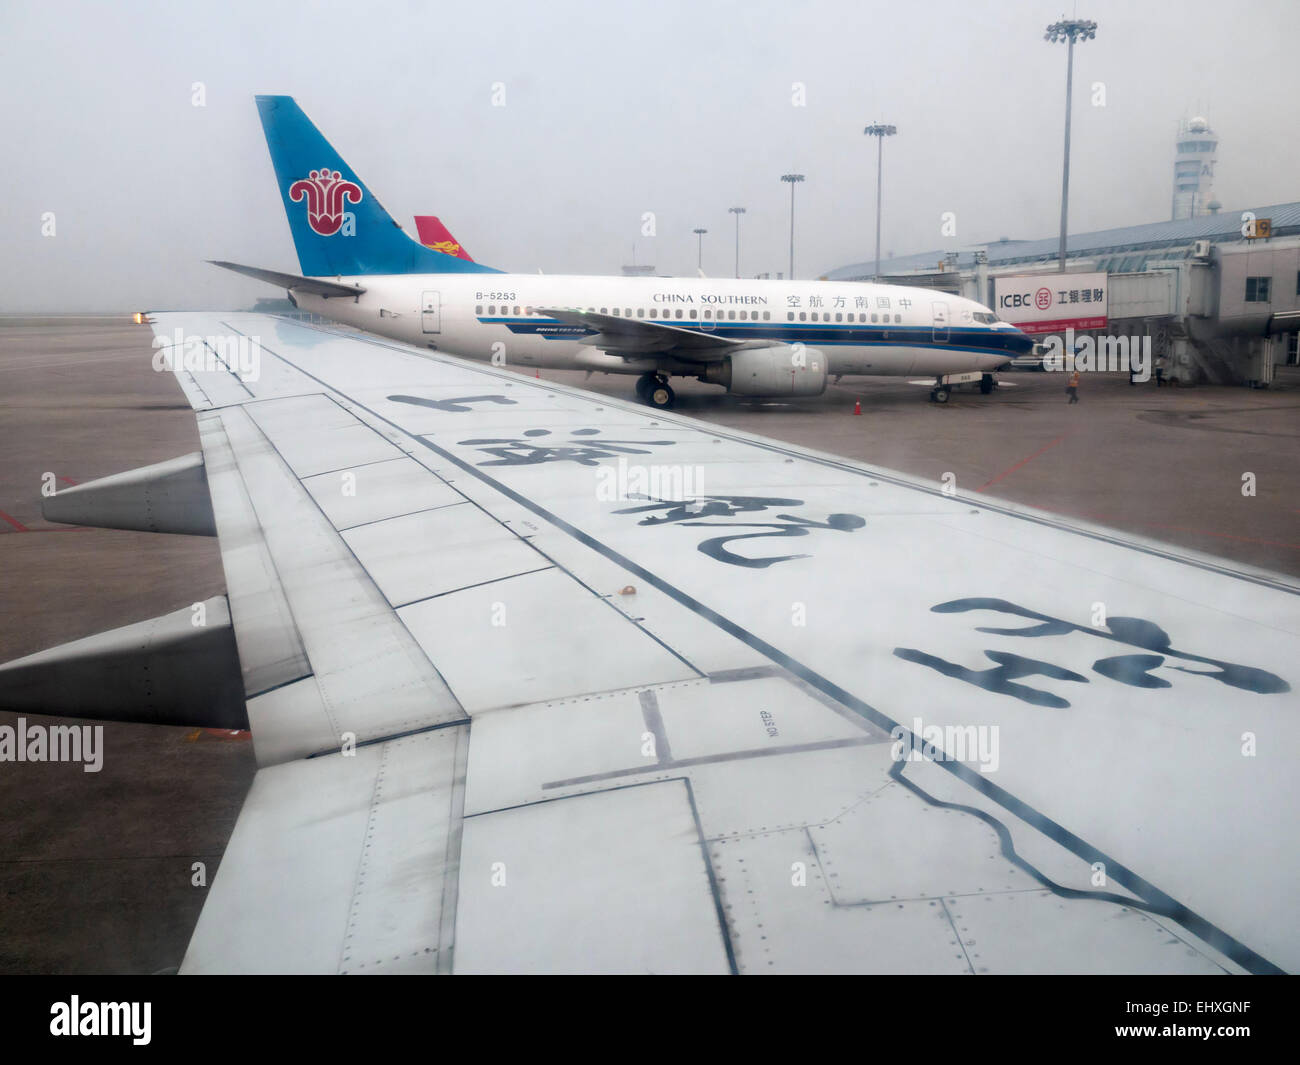 China Southern airlines airplane Stock Photo